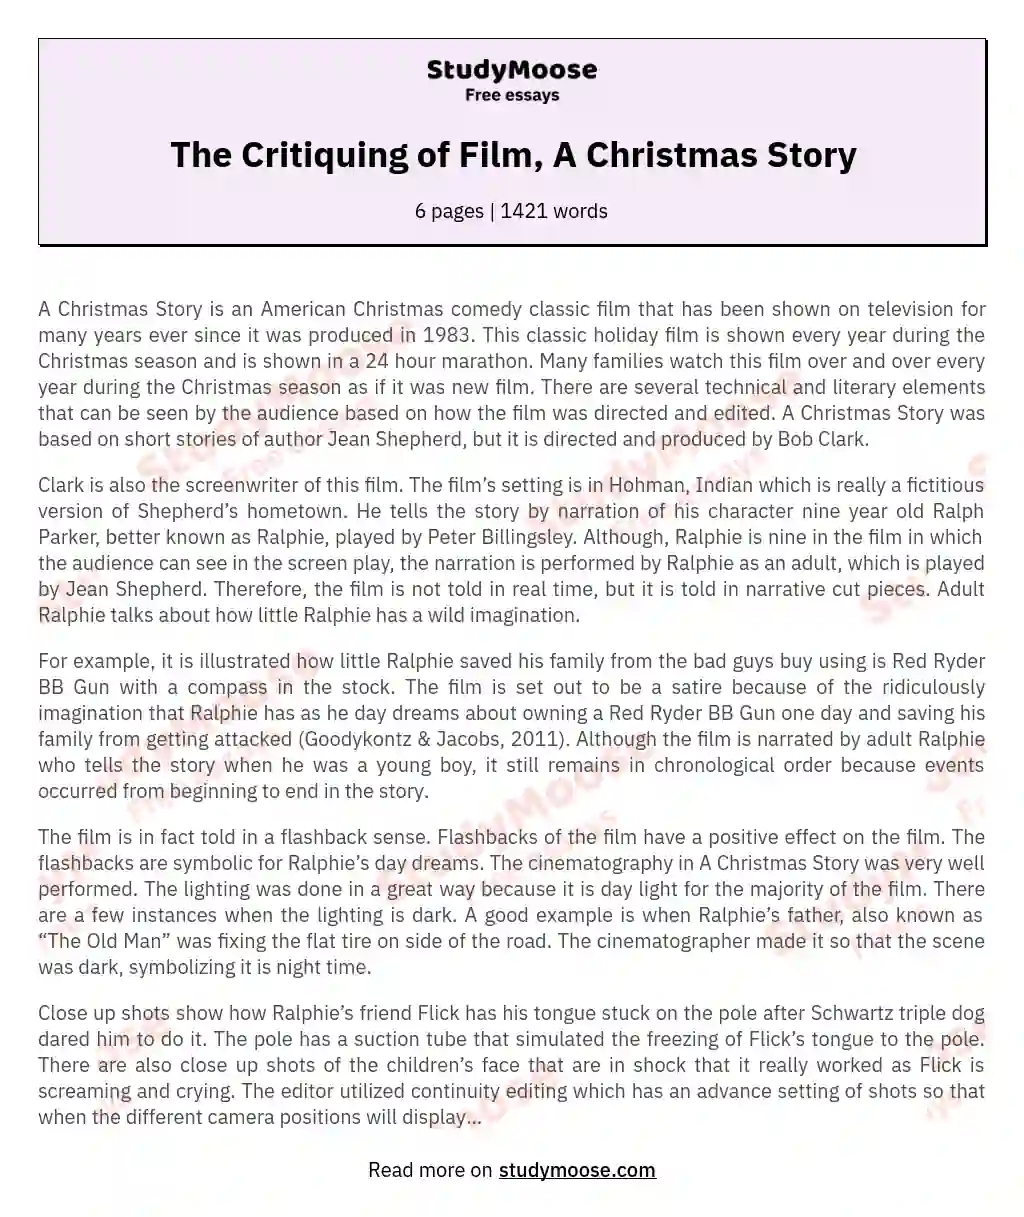 The Critiquing of Film, A Christmas Story